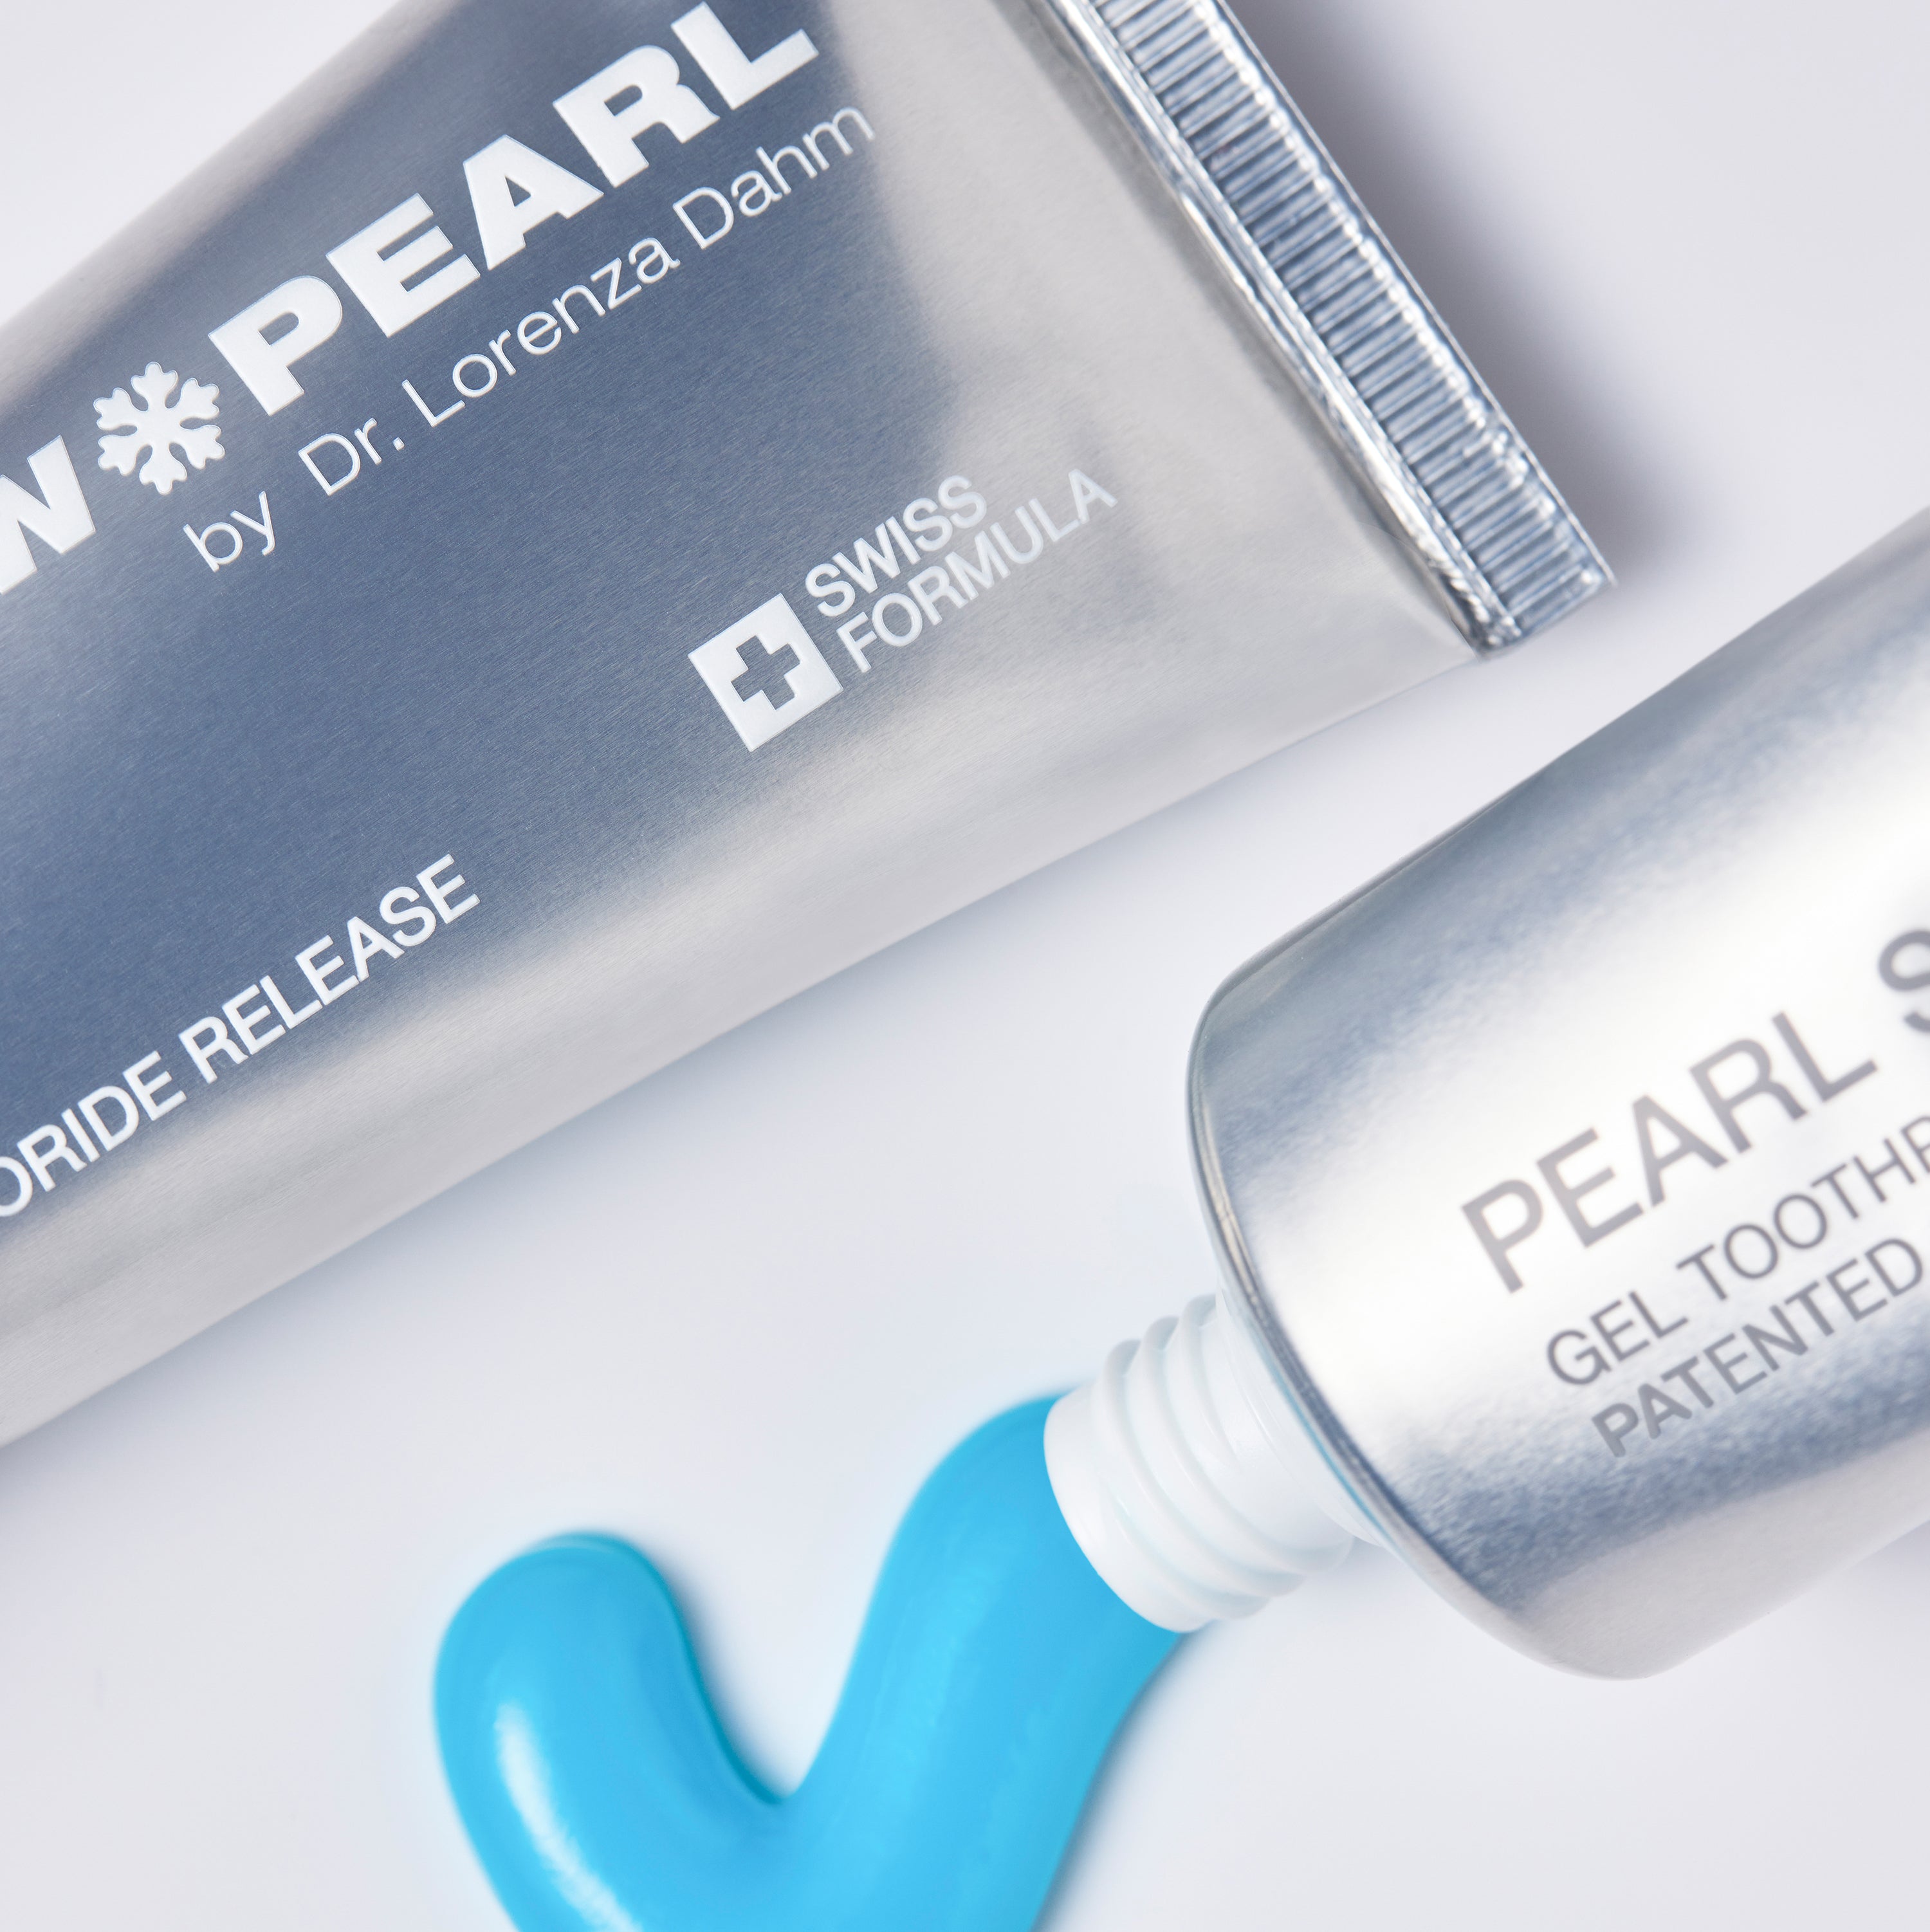 Travel Kit with PEARL SHIELD Gel Toothpaste 75ml - White